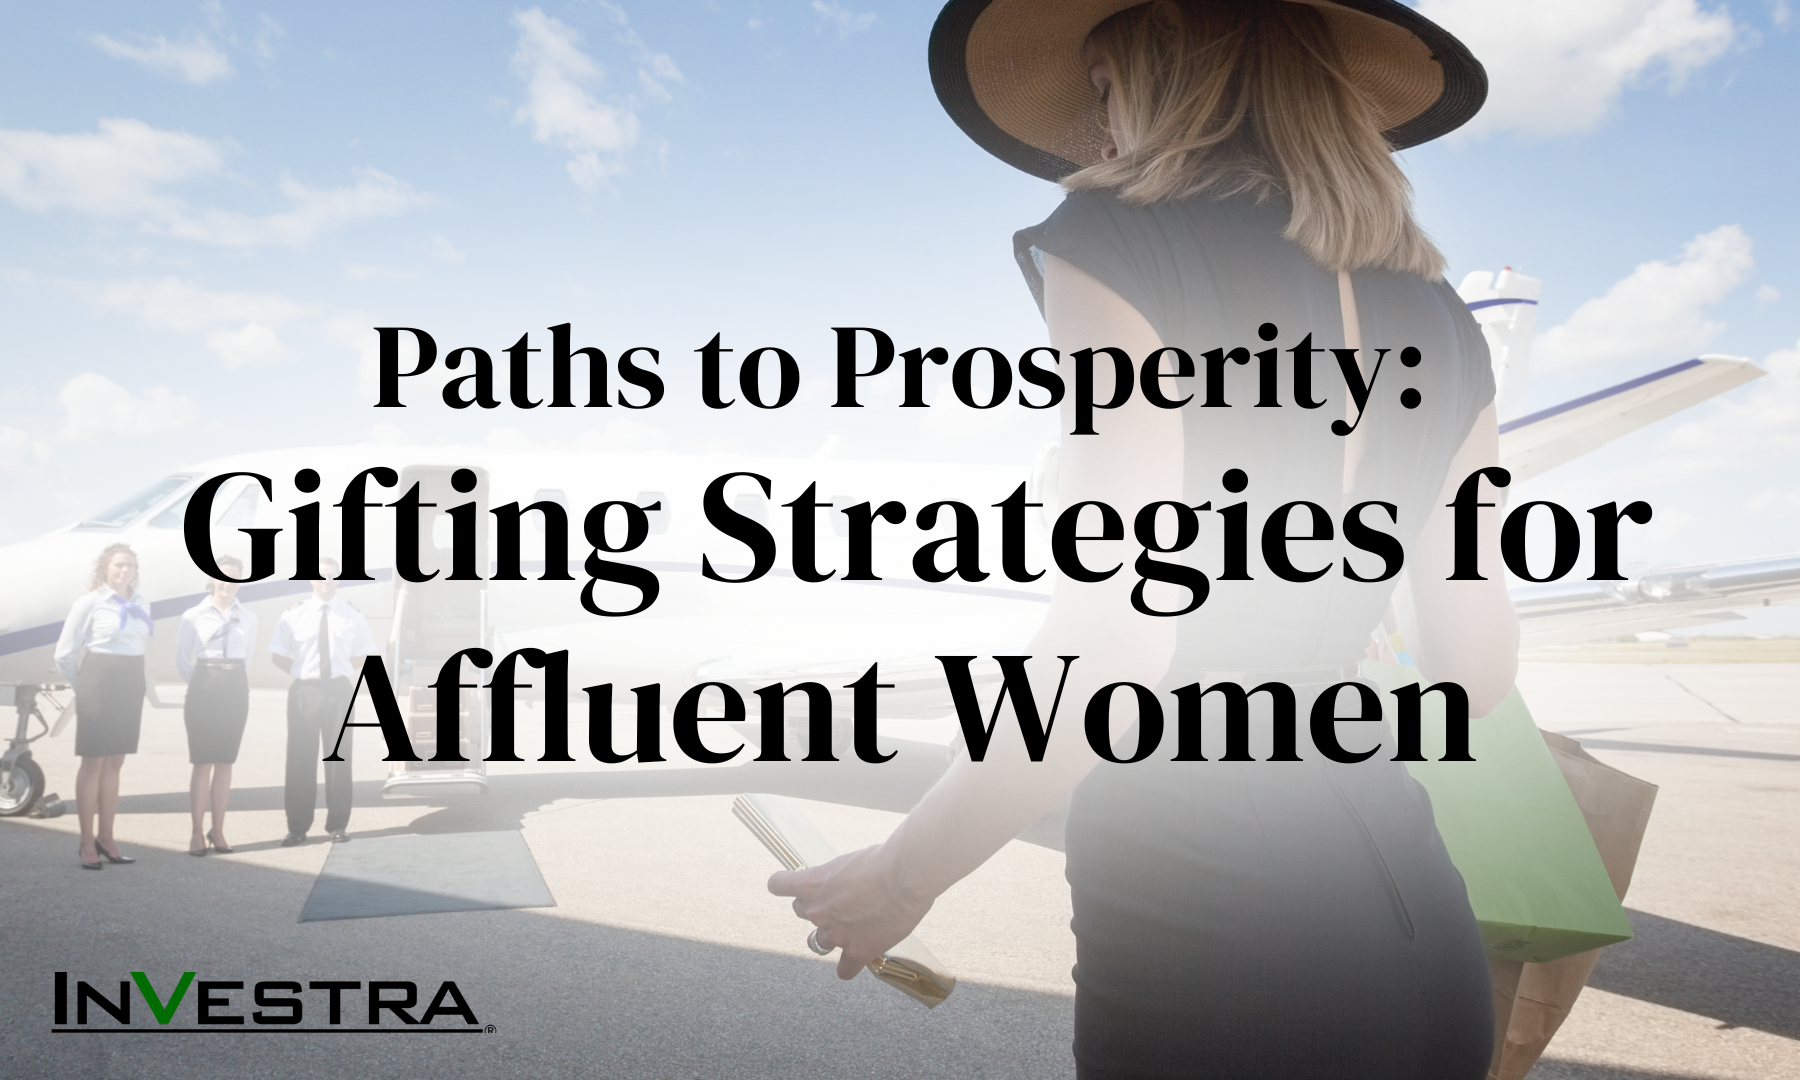 Paths to Prosperity: Gifting Strategies for Affluent Women